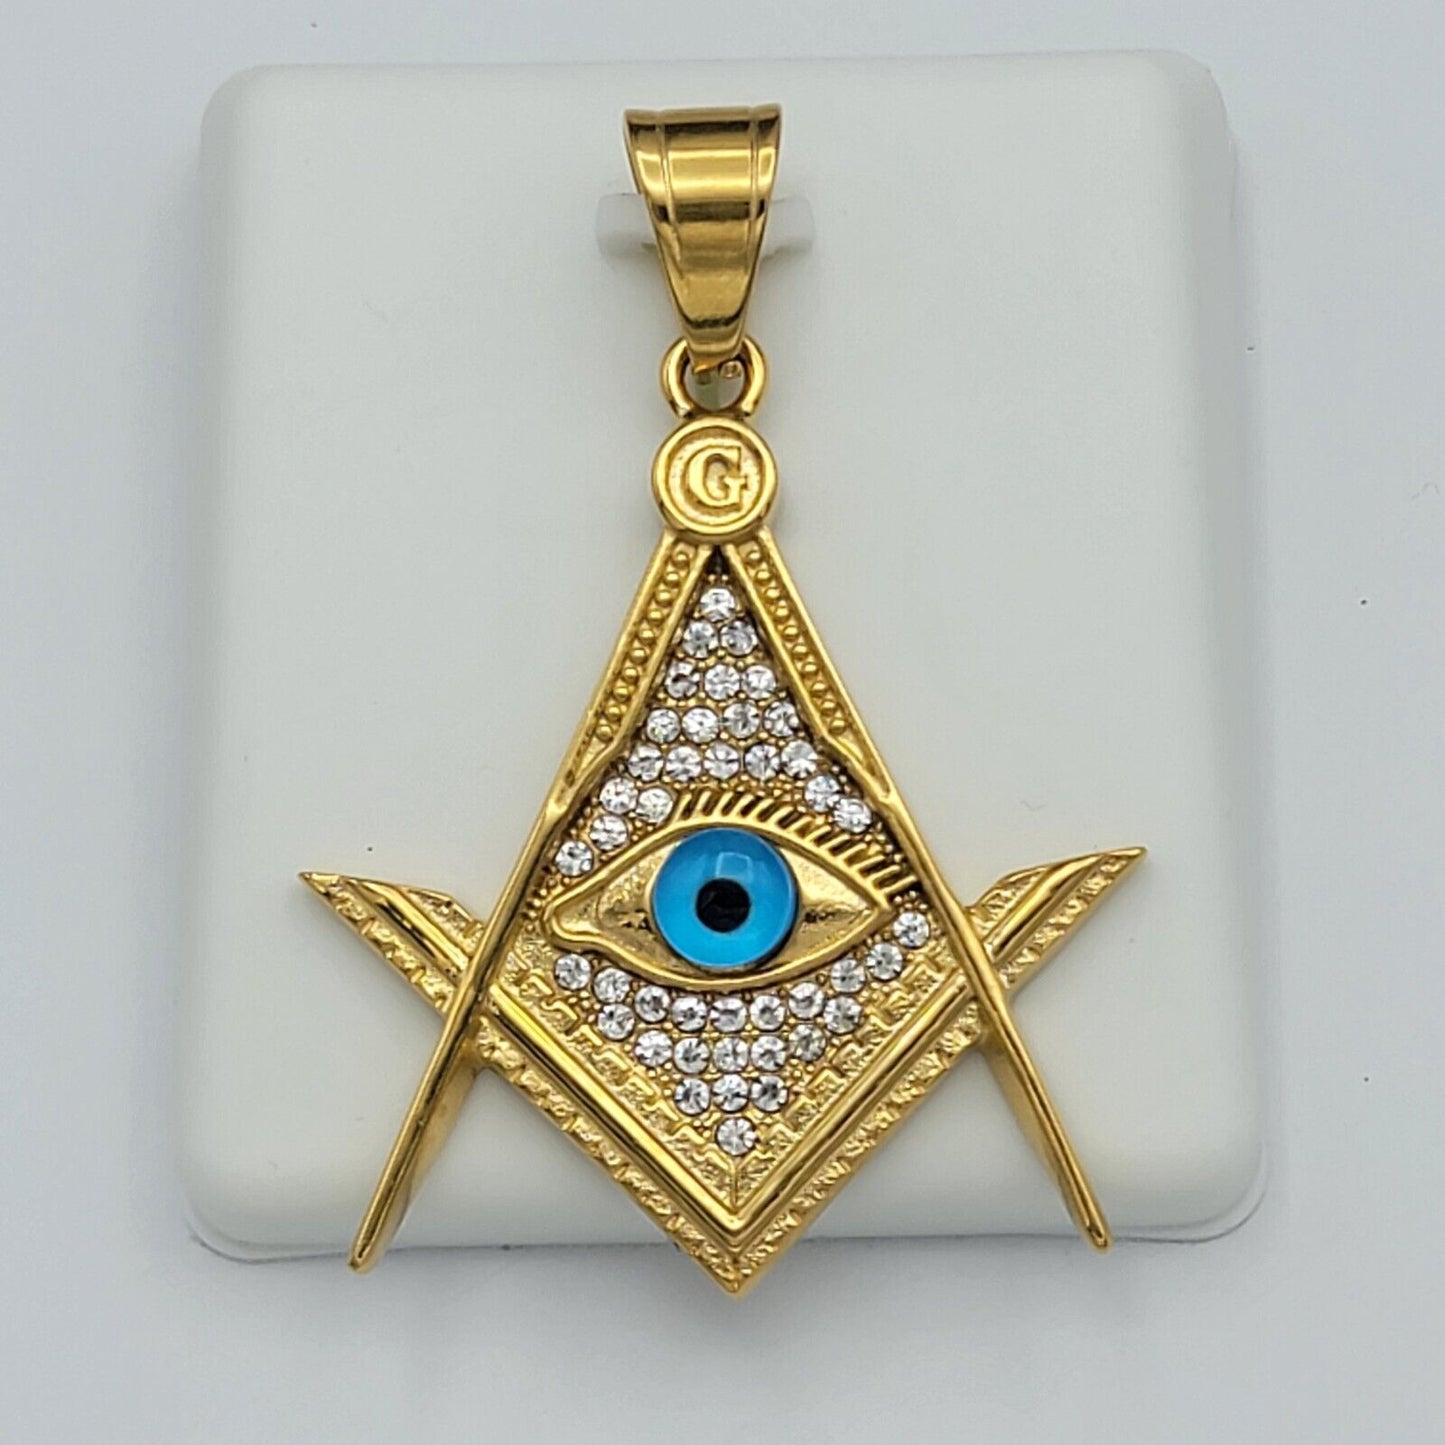 Necklaces - 24K Gold Plated. Masonic Square and Compasses Eye of Providence Pendant & Chain.